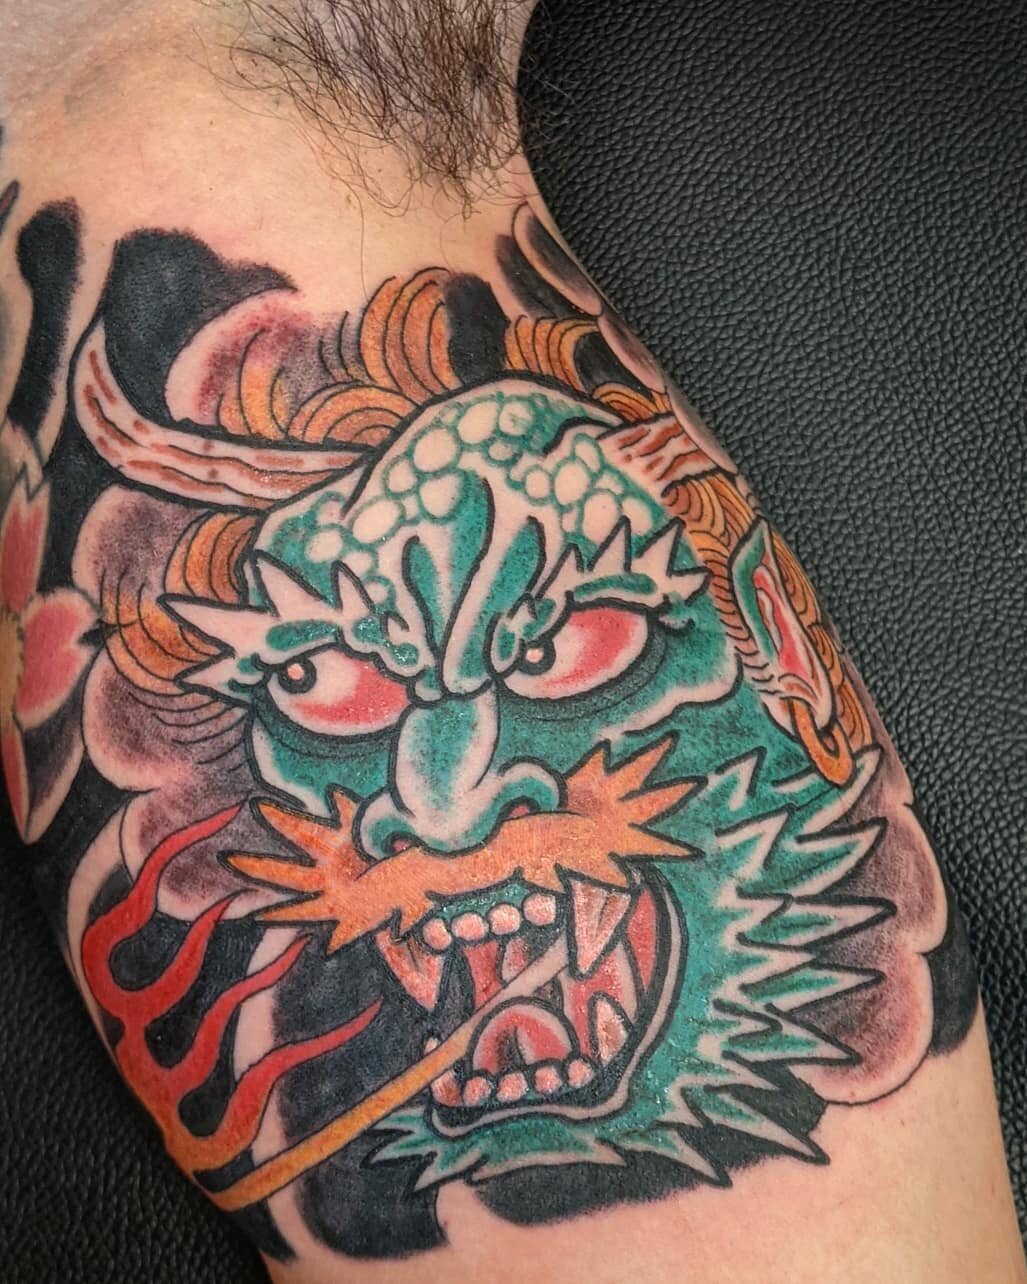 Oni head to go with Raiku on the outside, thank you Ross!

#threeriverstattoo #traditionaljapanese #traditionaltattoo #onitattoo #ogreisland 
#chromatattooink #humansushi